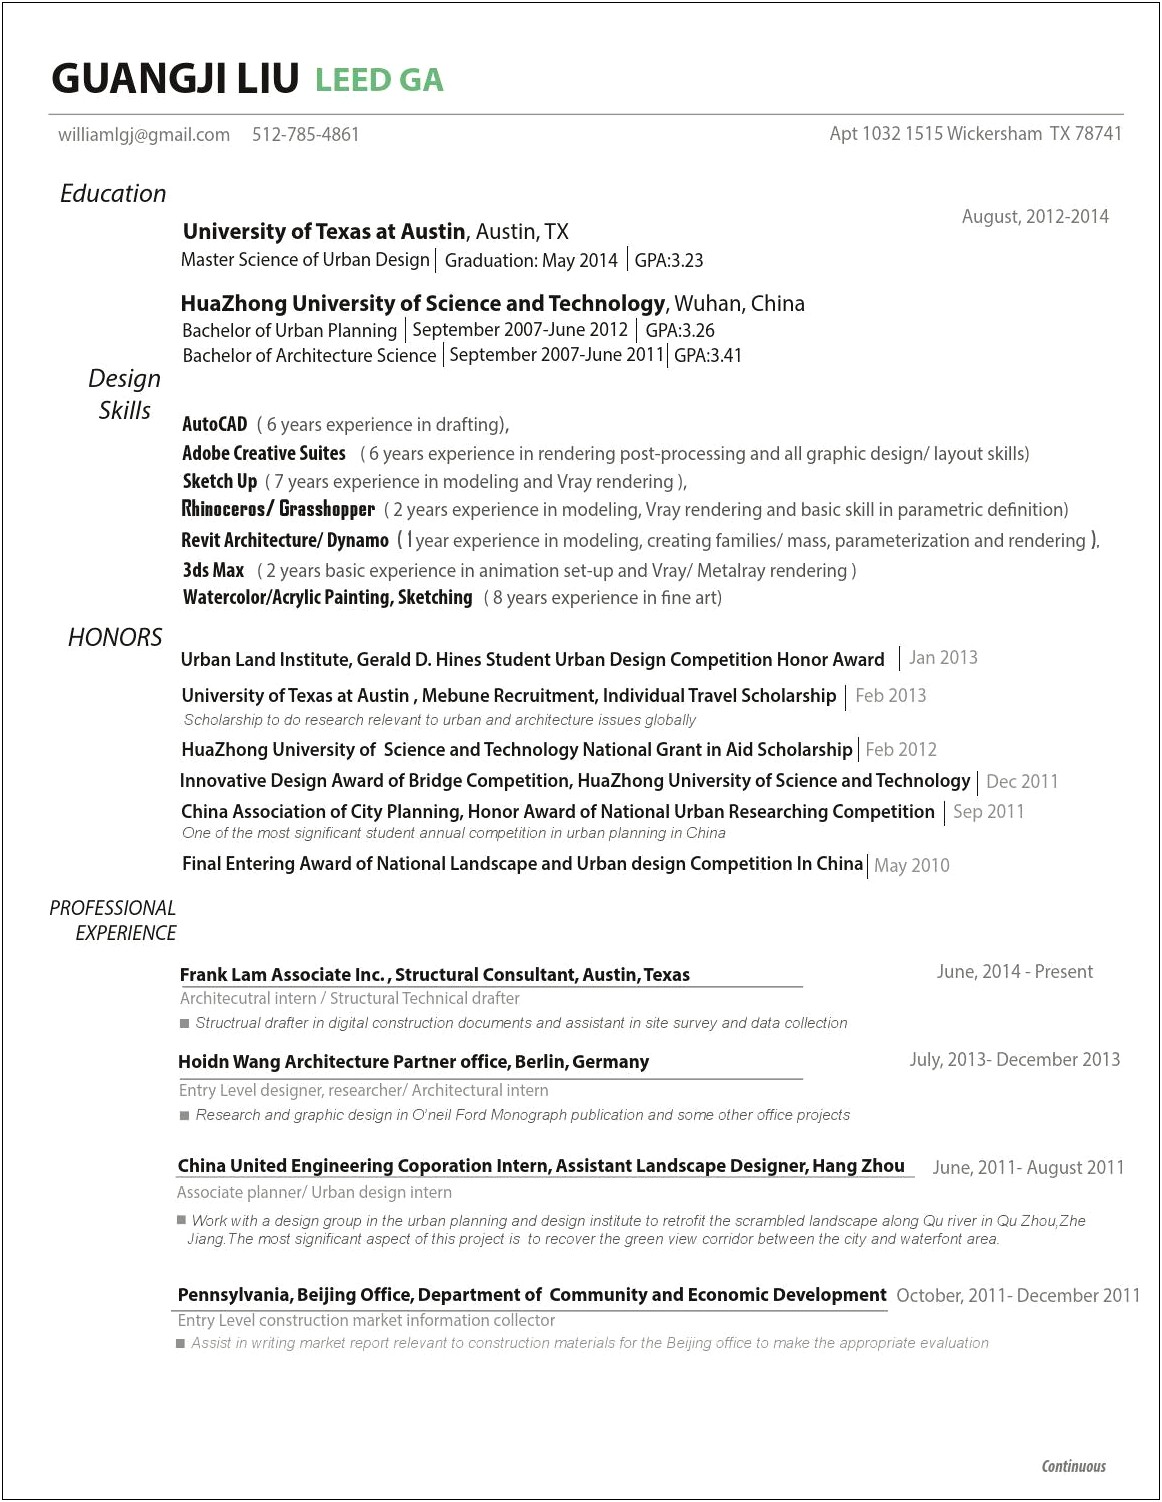 Rws 290 Cover Letter And Resume Project